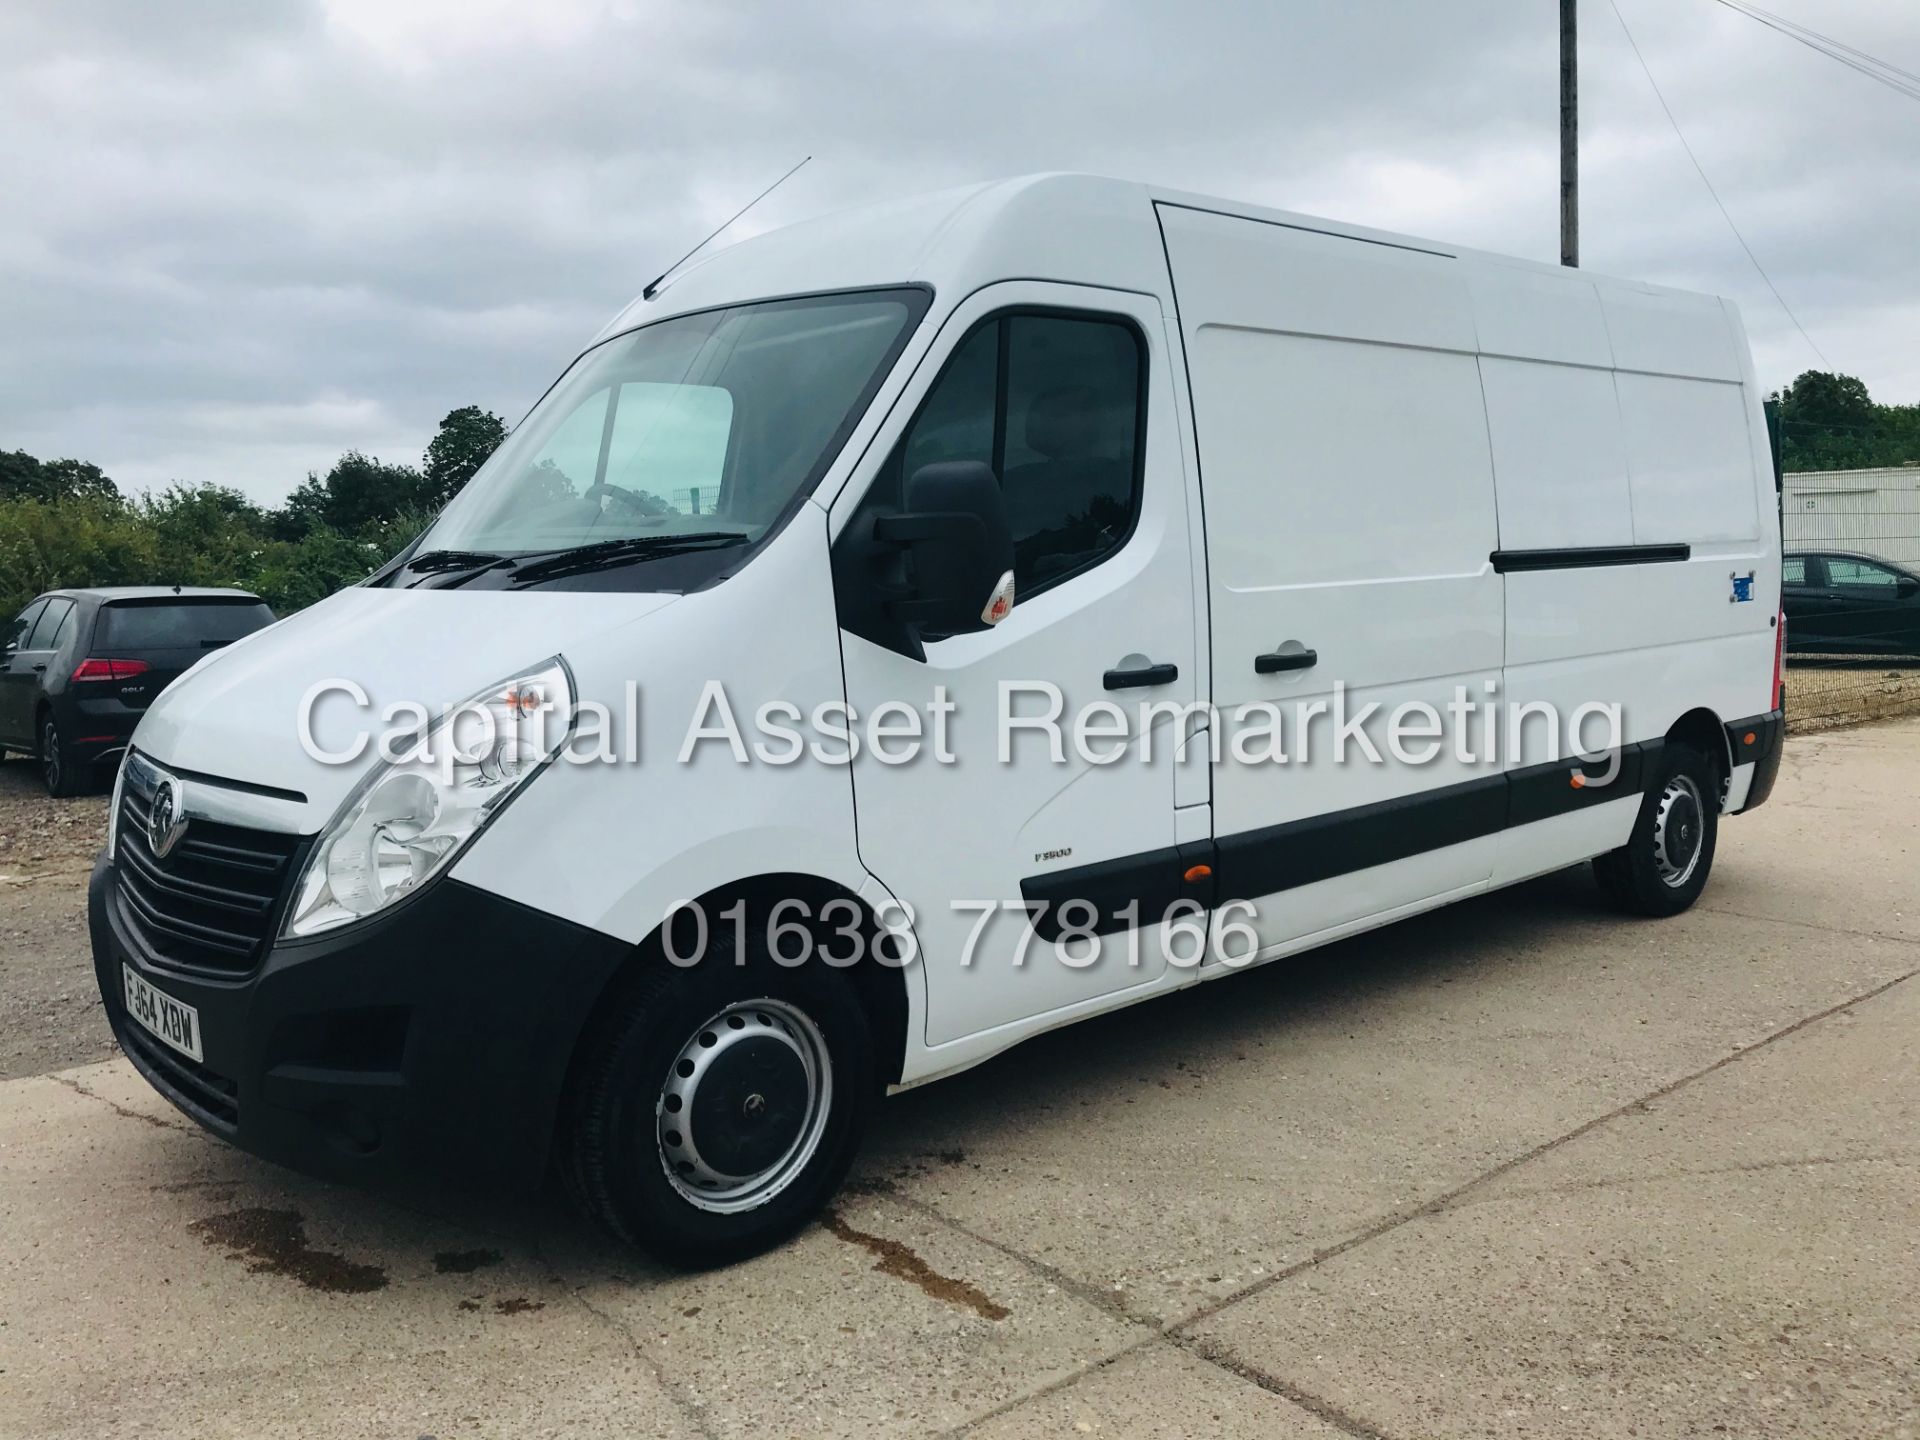 ON SALE VAUXHALL MOVANO 2.3CDTI "125BHP" LWB VAN WITH PALFINGER ELECTRIC TAIL LIFT-LOW MILES 64 REG - Image 7 of 24